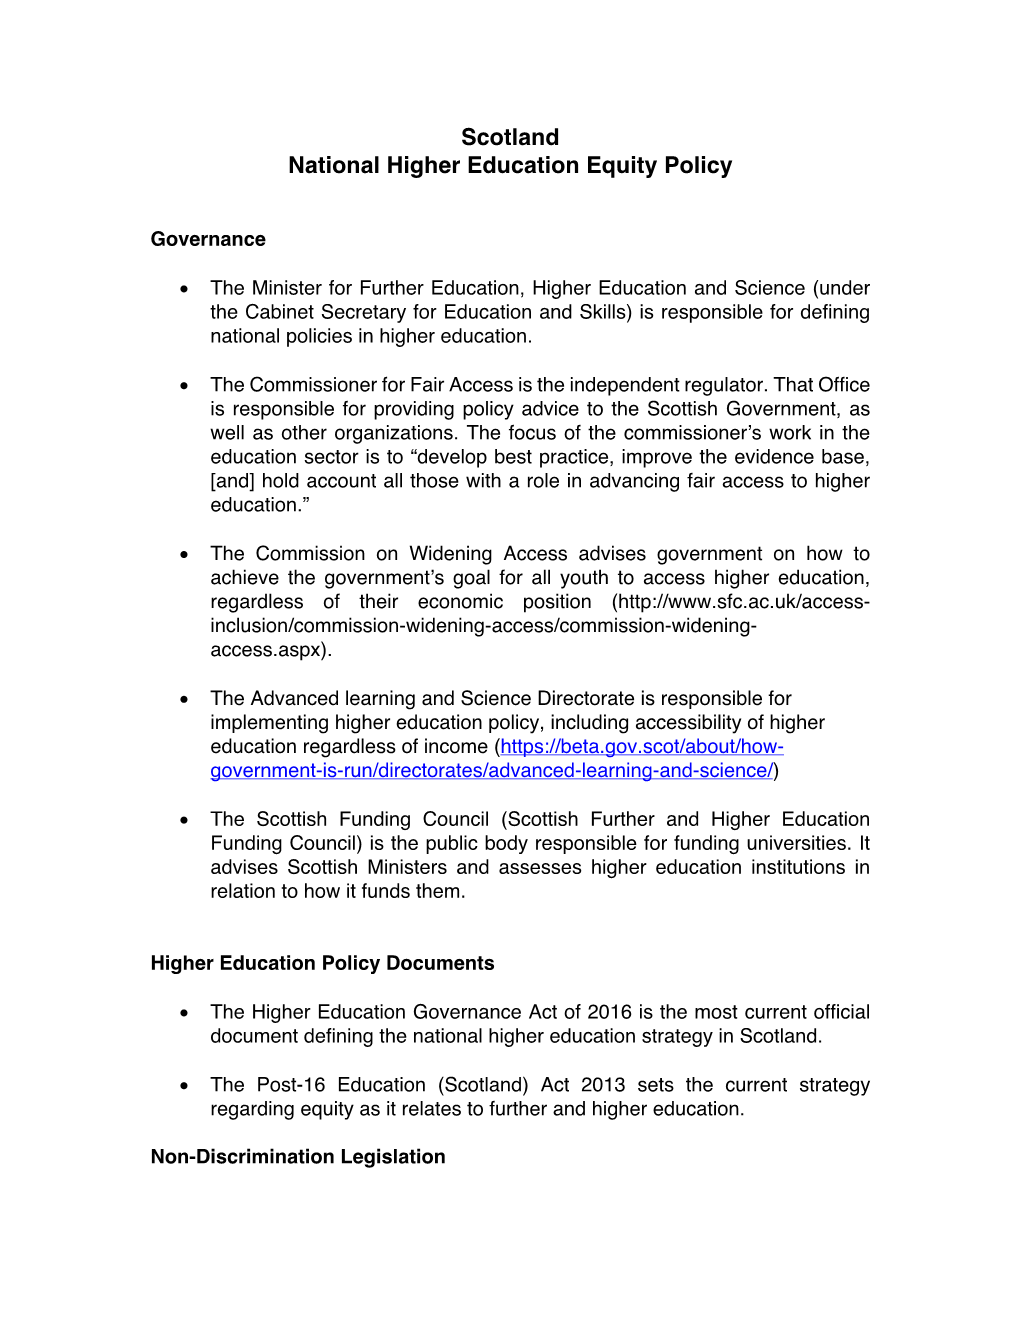 Scotland National Higher Education Equity Policy